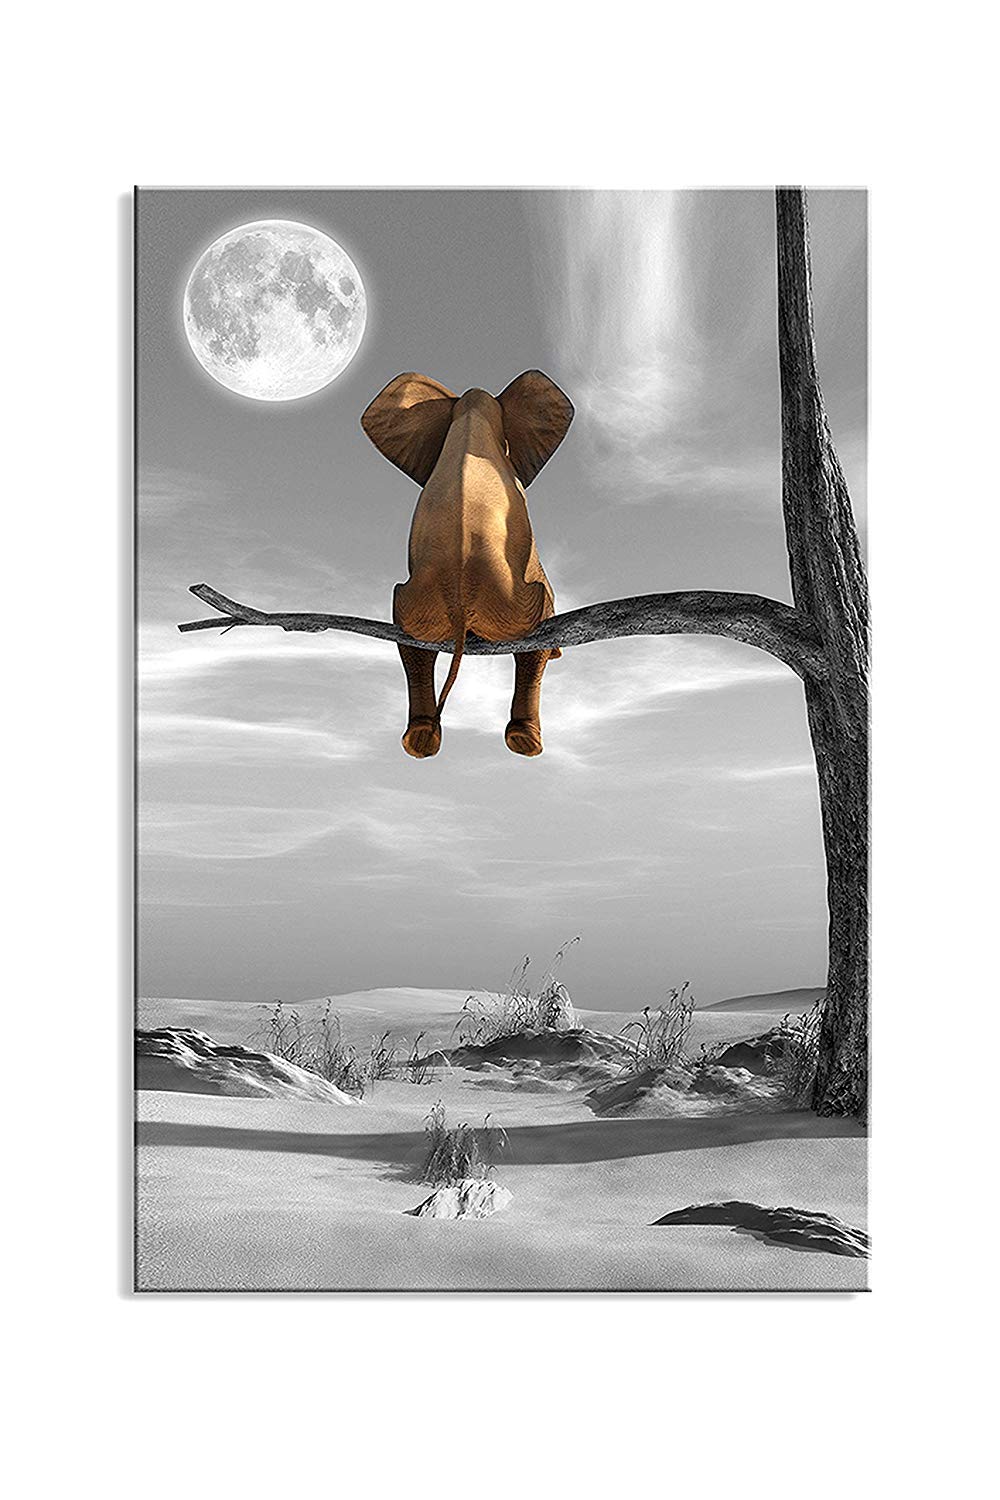 Book Cover Canvas Wall Art Animal Resting Elephant Look at the moon Wall Pictures Giclee wall decor on Canvas Stretched artwork Living Room Bedroom Ready to Hang